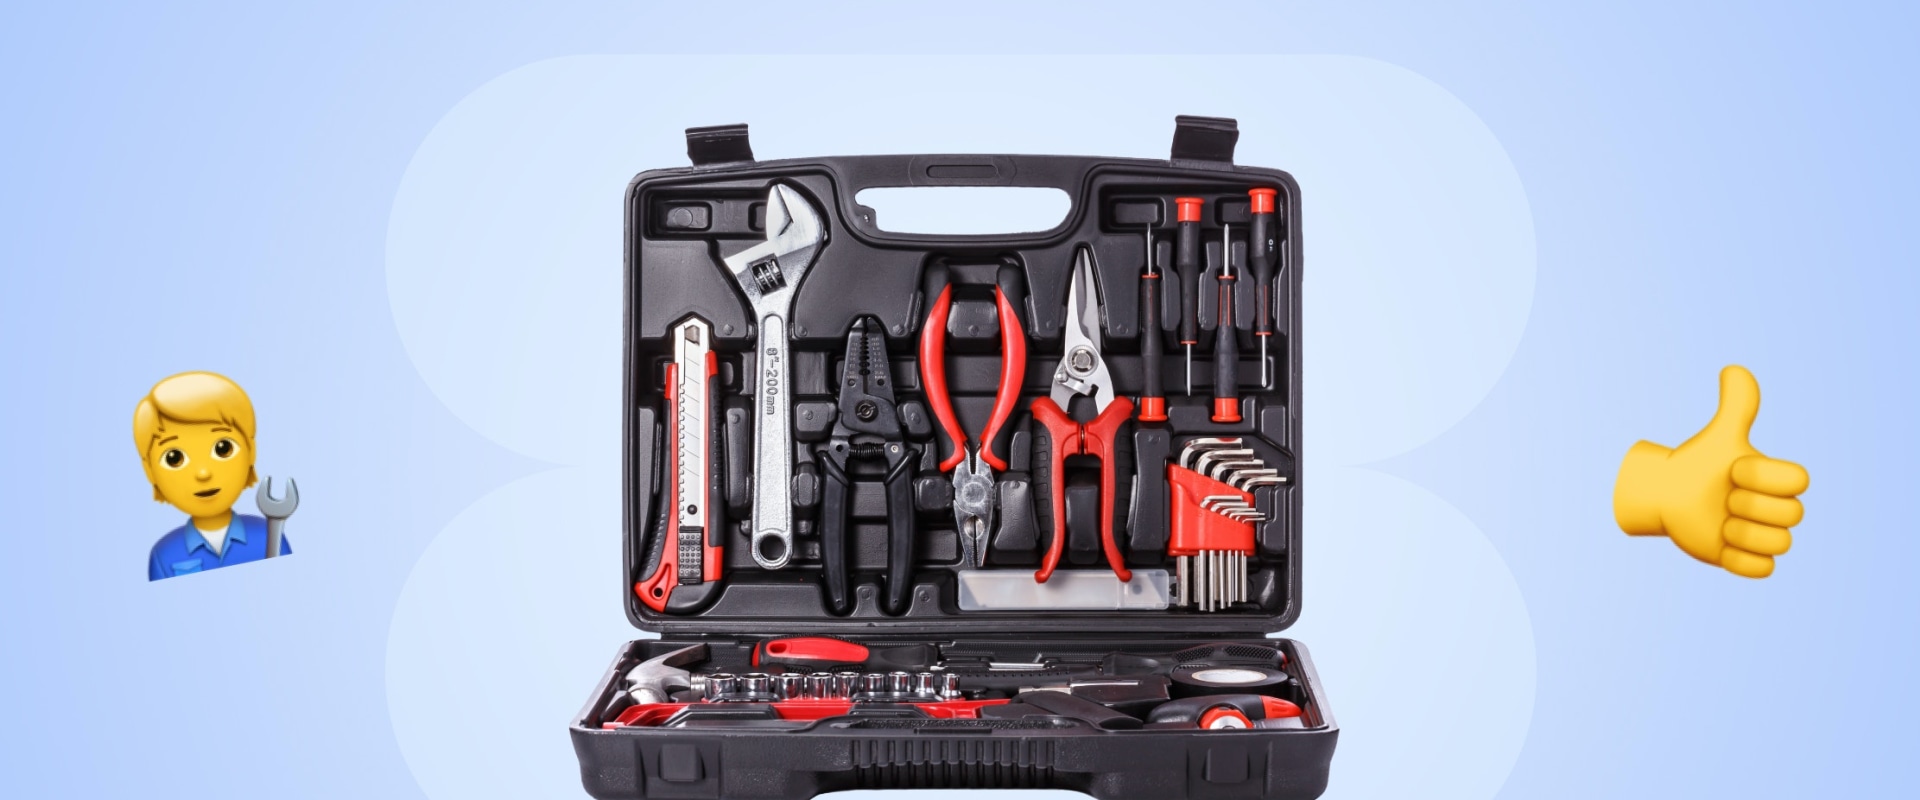 Essential Tools and Equipment for HVAC Maintenance Services